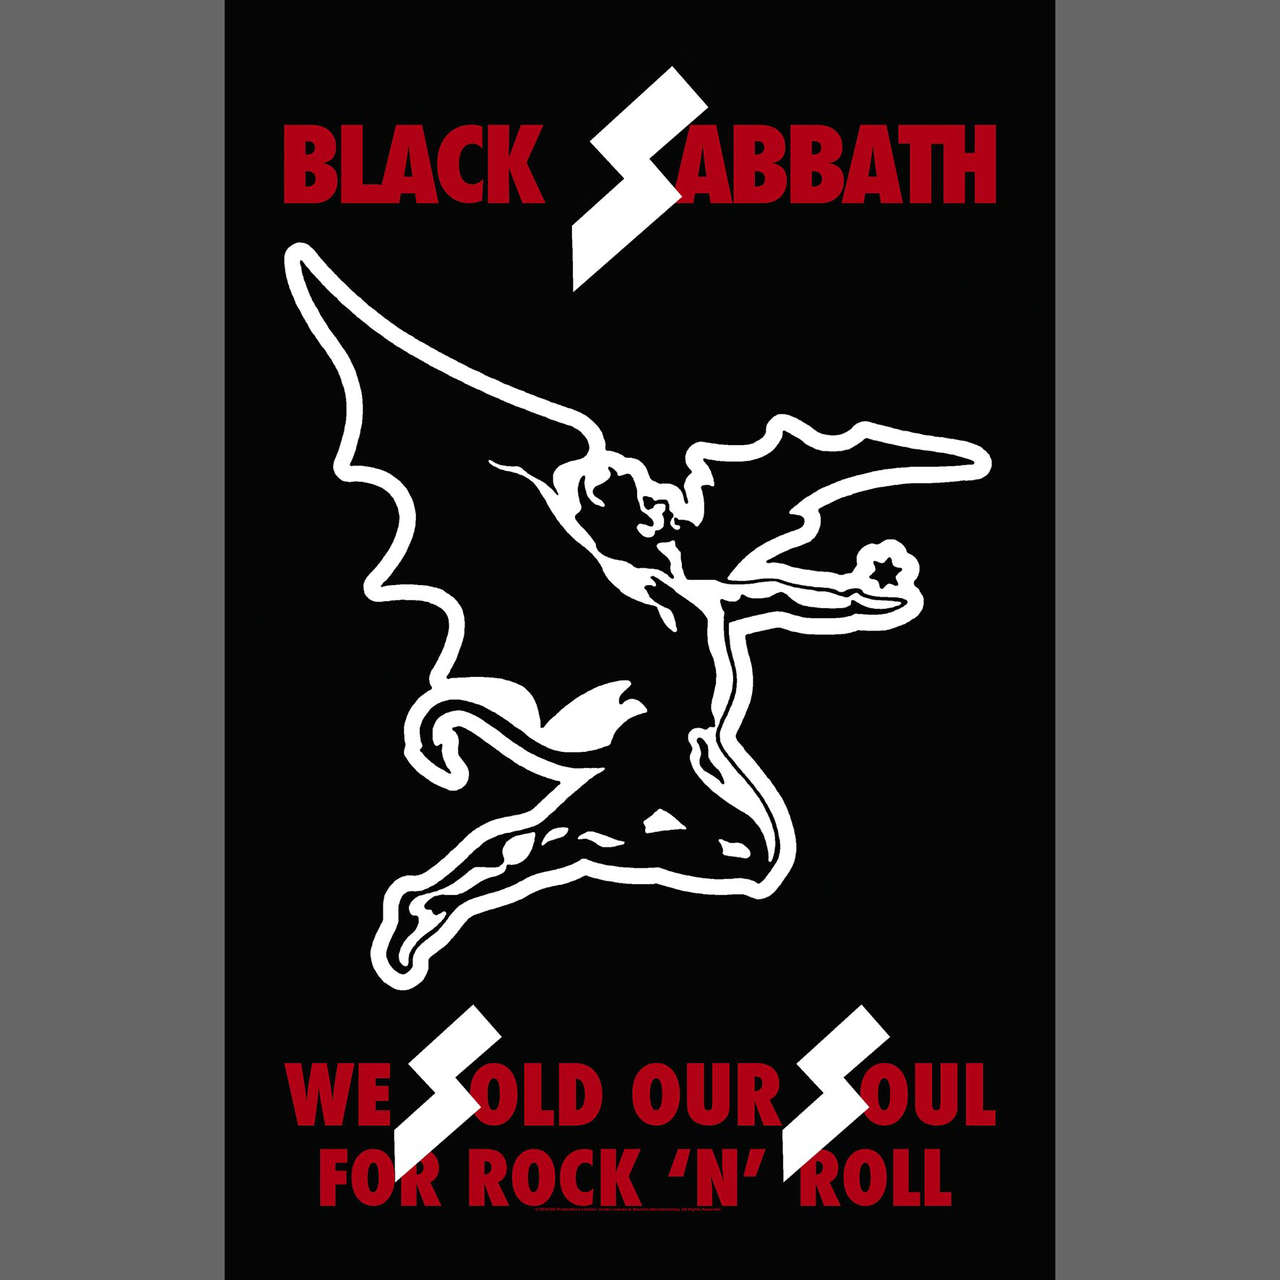 Black Sabbath - We Sold Our Soul for Rock 'n' Roll (Textile Poster)